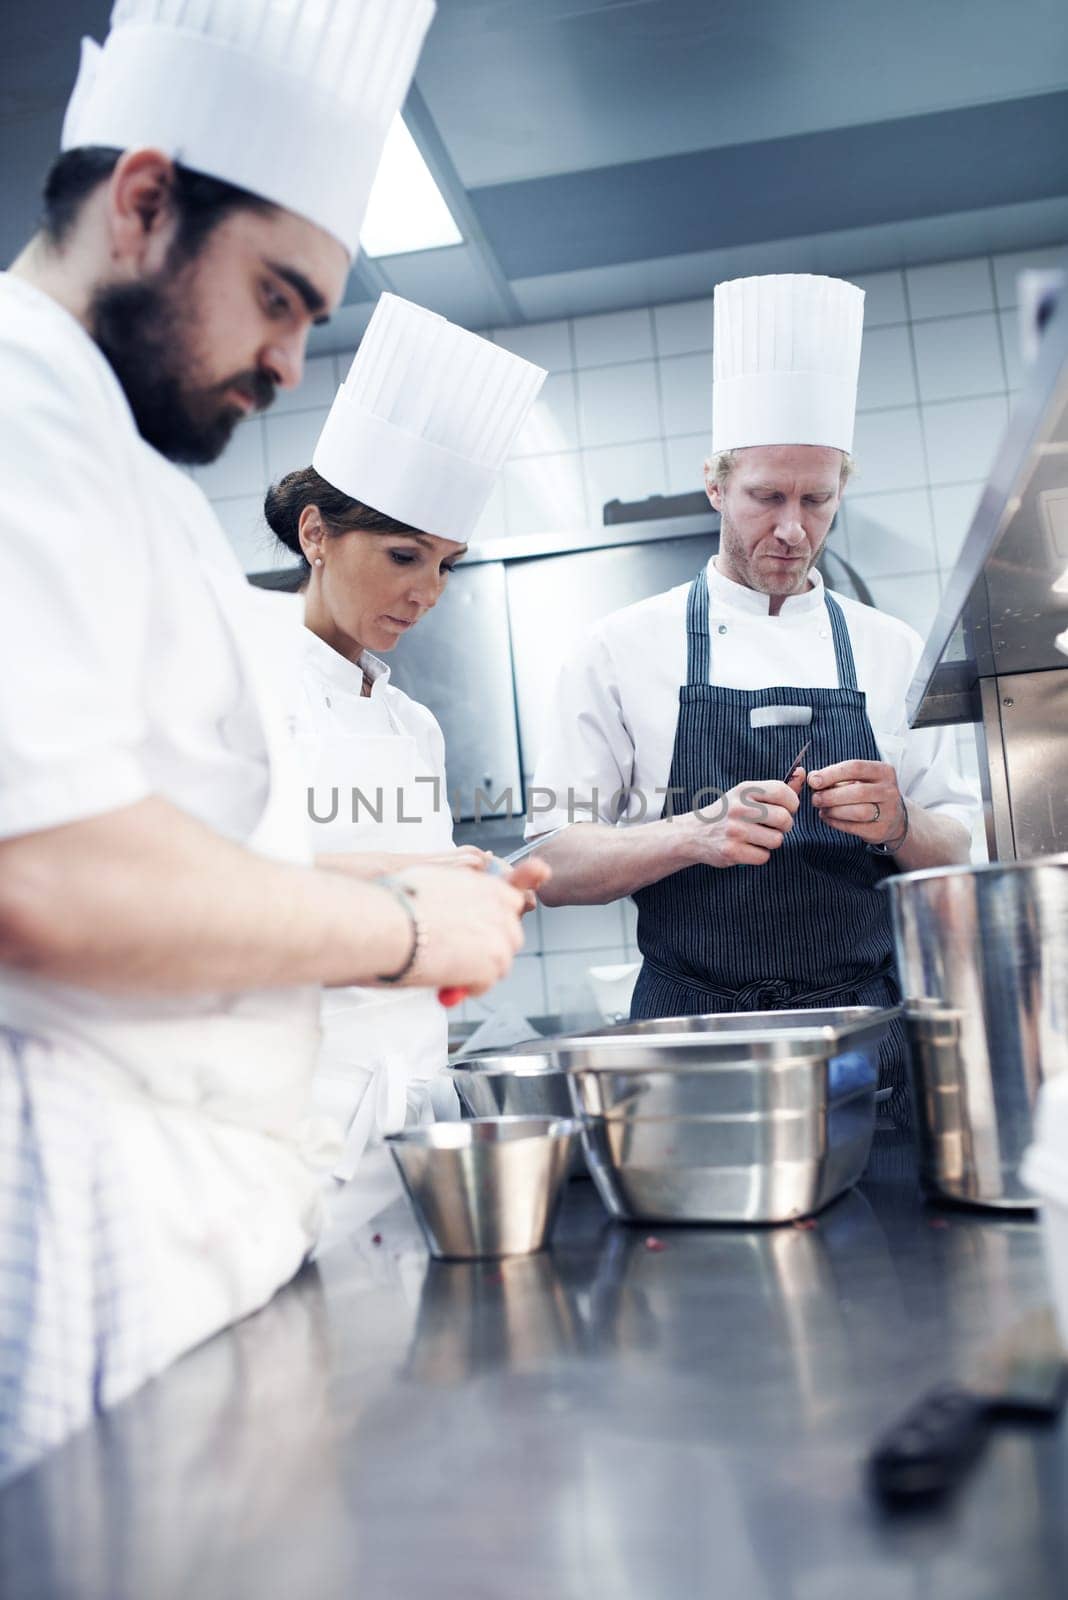 Everyone is working the line. chefs preparing a meal service in a professional kitchen